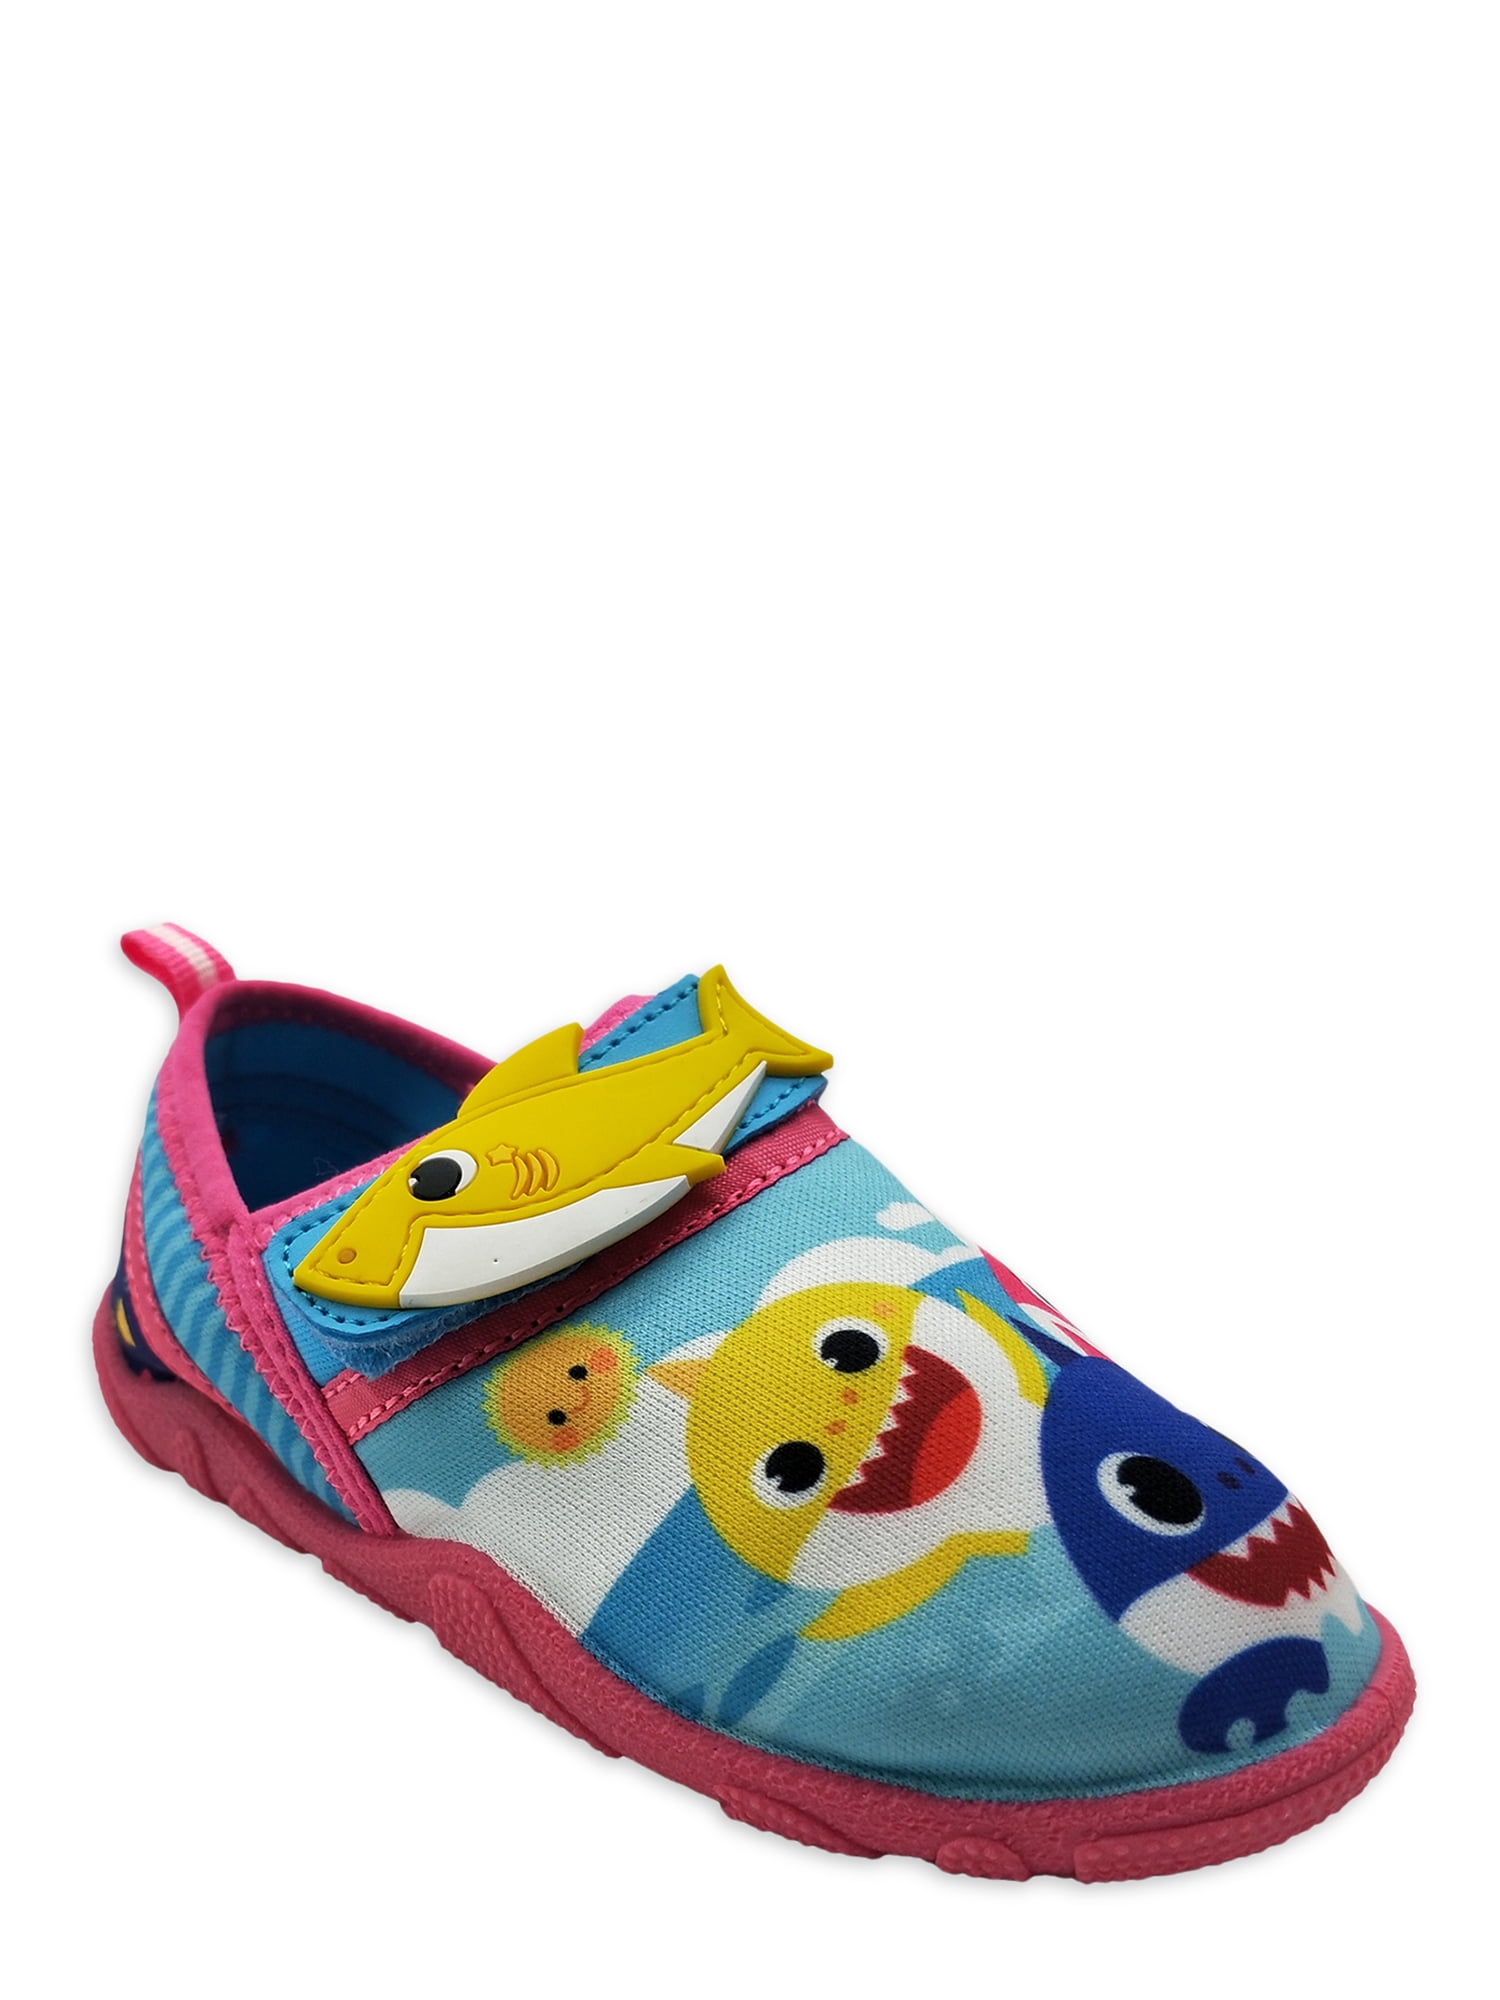 Toddler Girls' Water Shoes-Pink Bright/Blue 